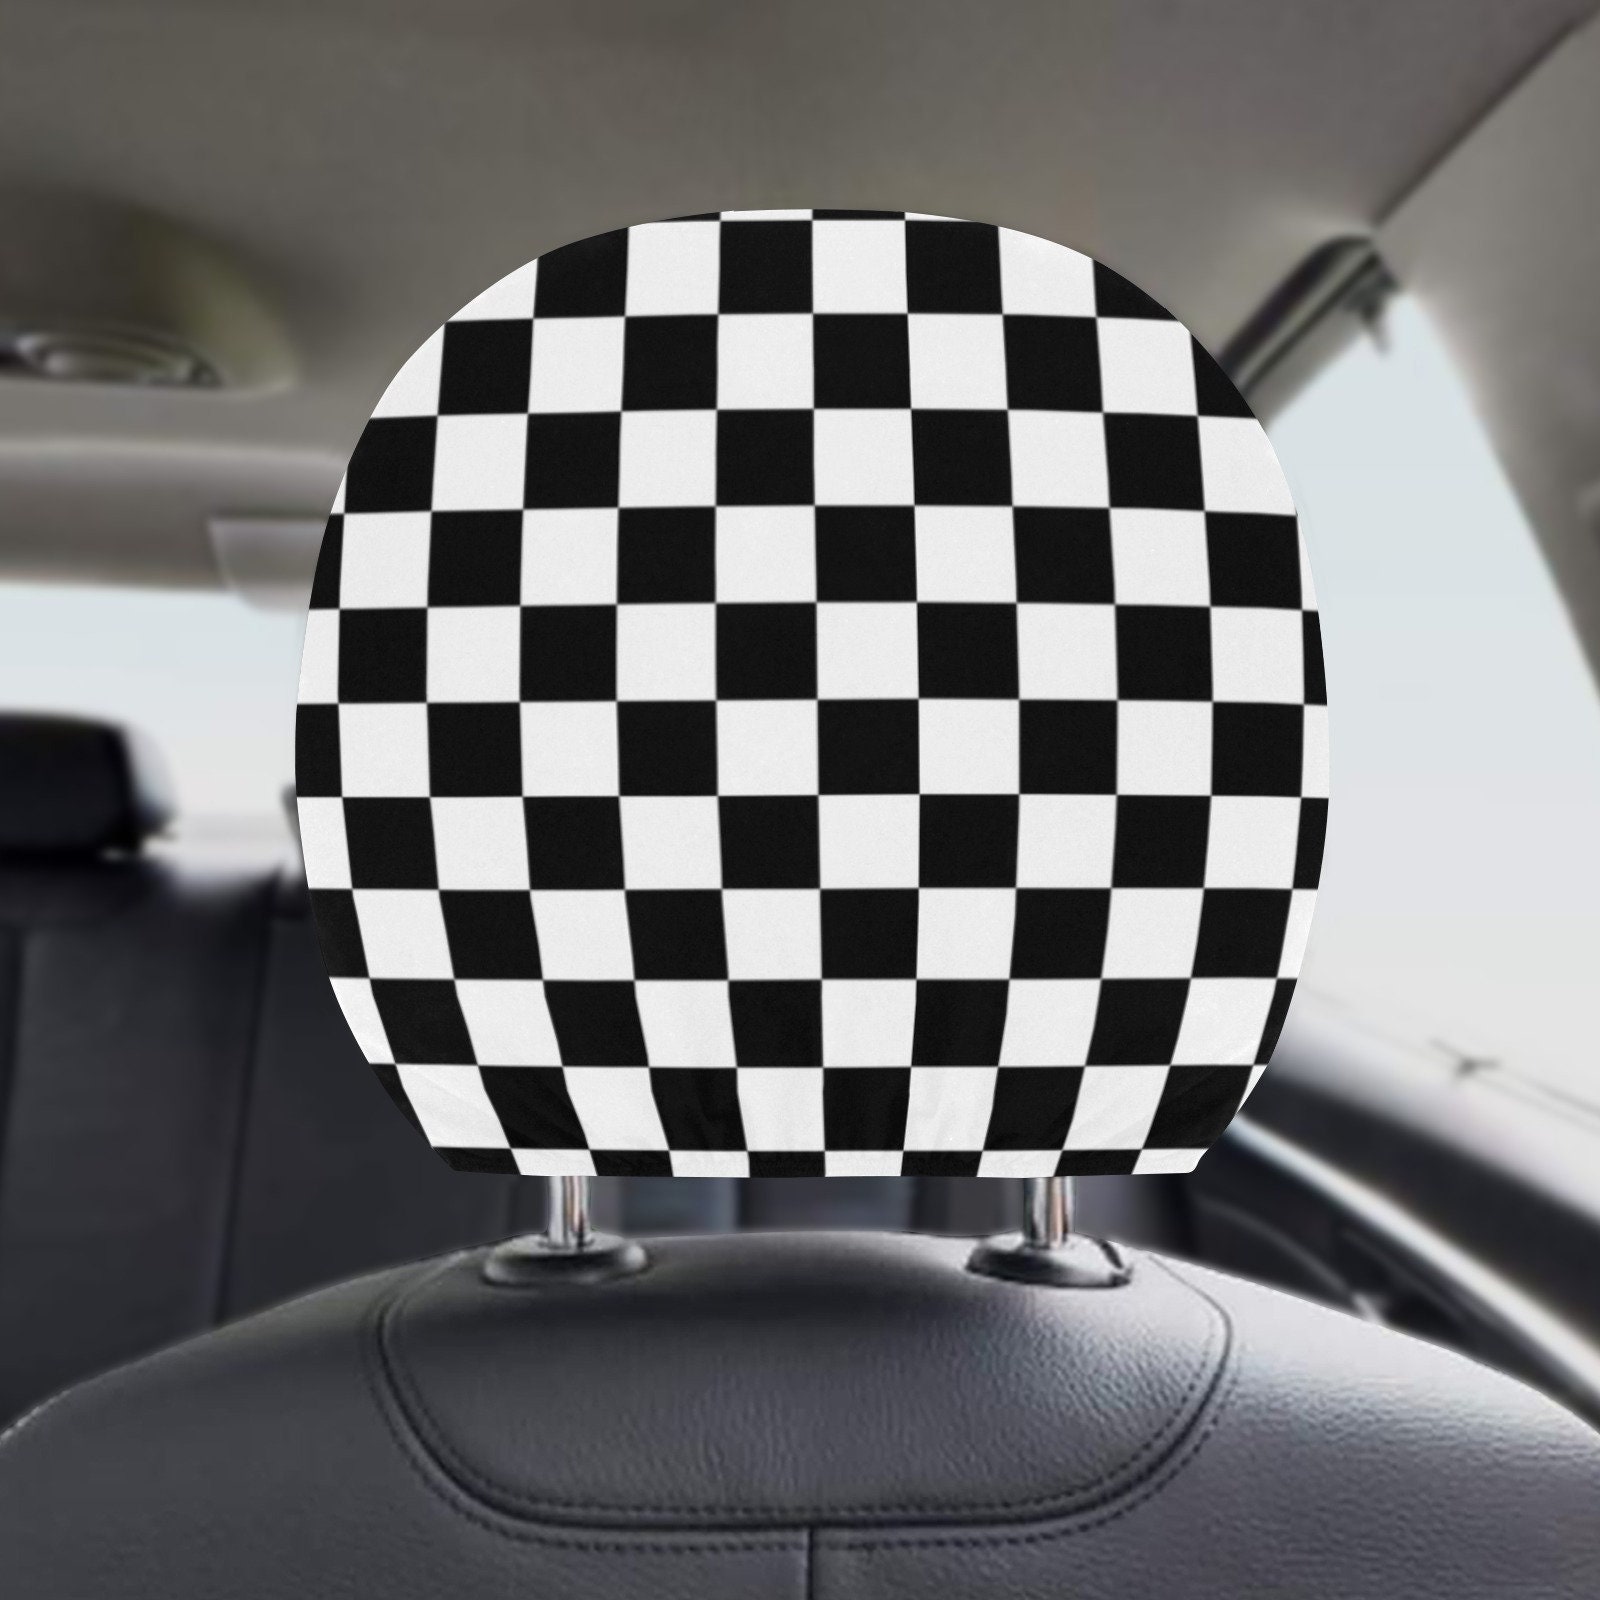 Checkered Car Seat Headrest Cover (2pcs), Black White check Racing Print Truck Suv Van Vehicle Auto Decoration Protector New Car Gift